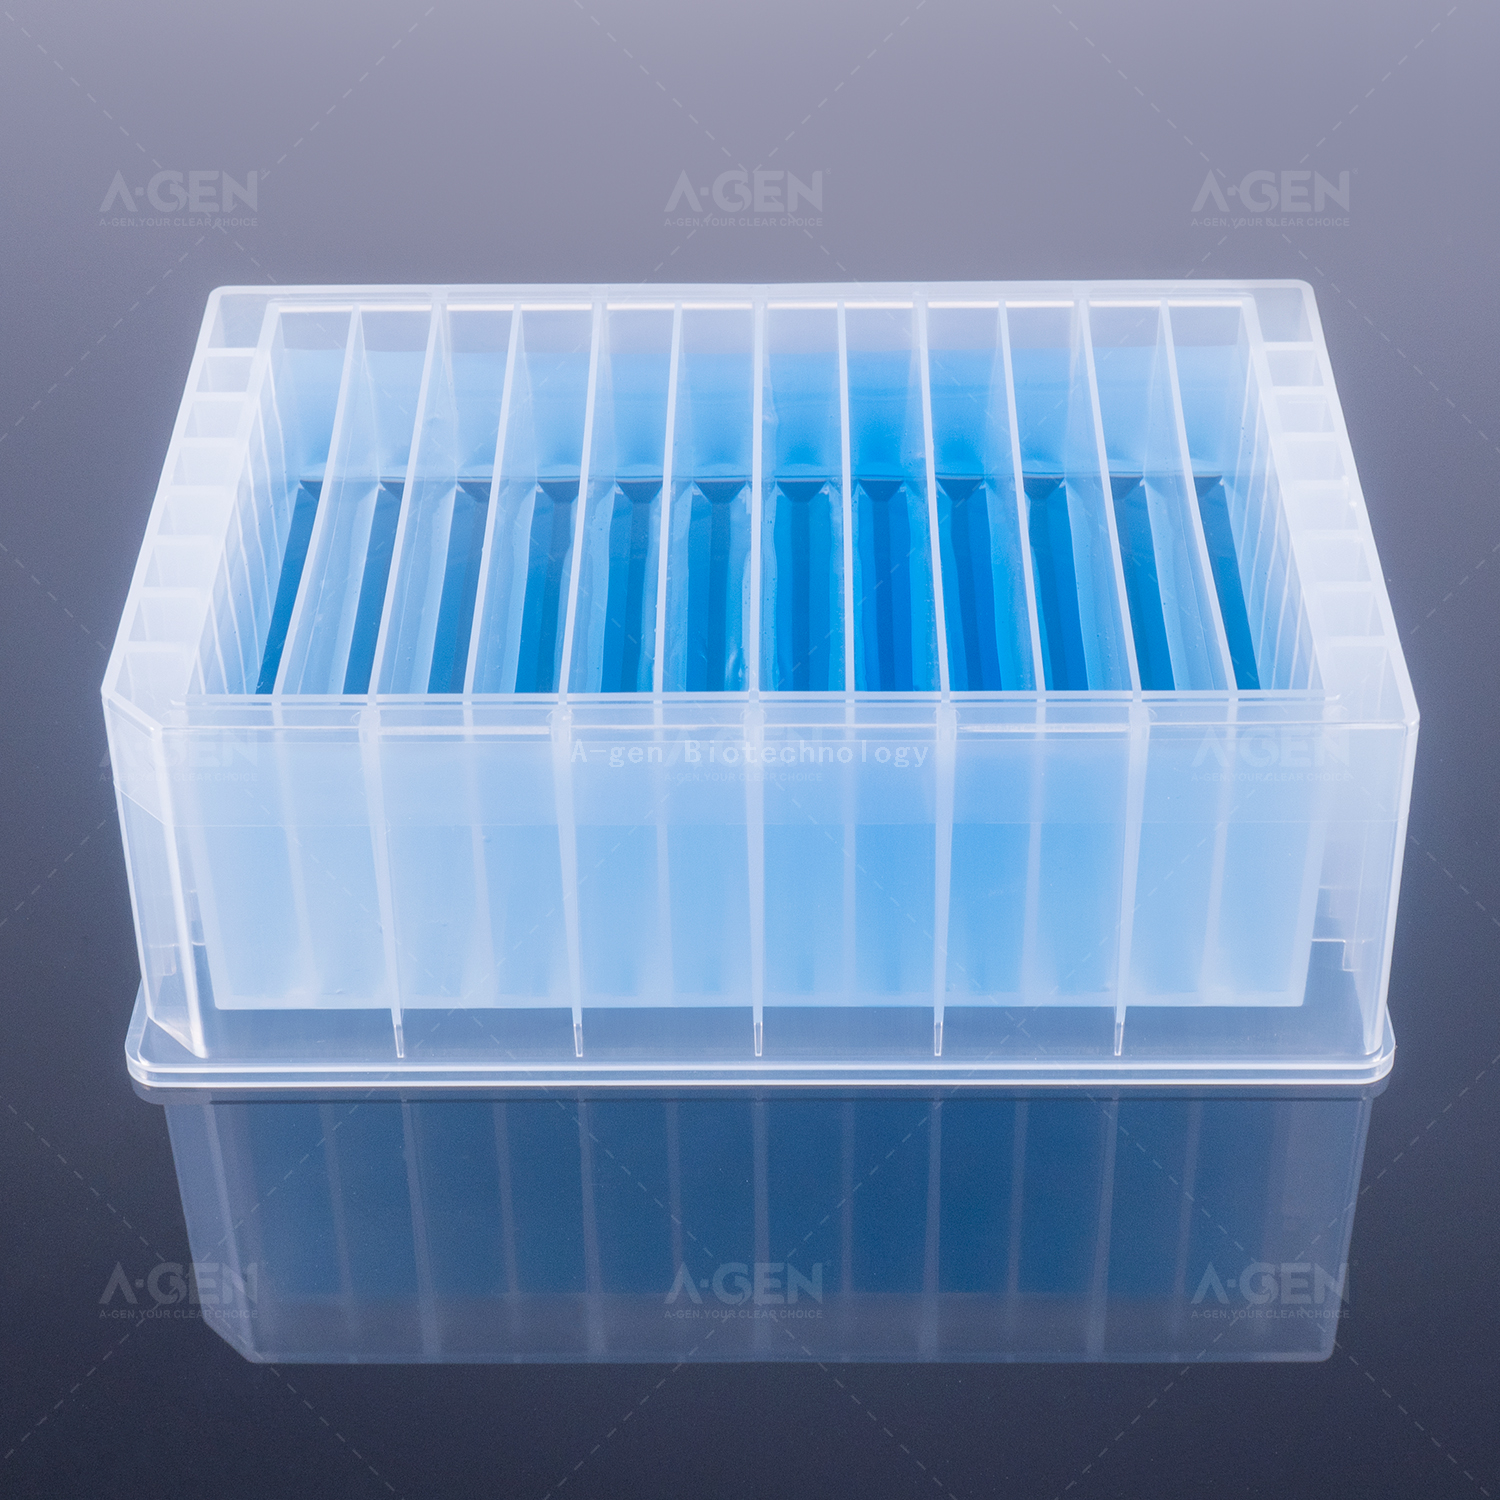 22mL 12 Individual Channel Trough Pipetting Reagent Reservoir High Profile 12x22mL 